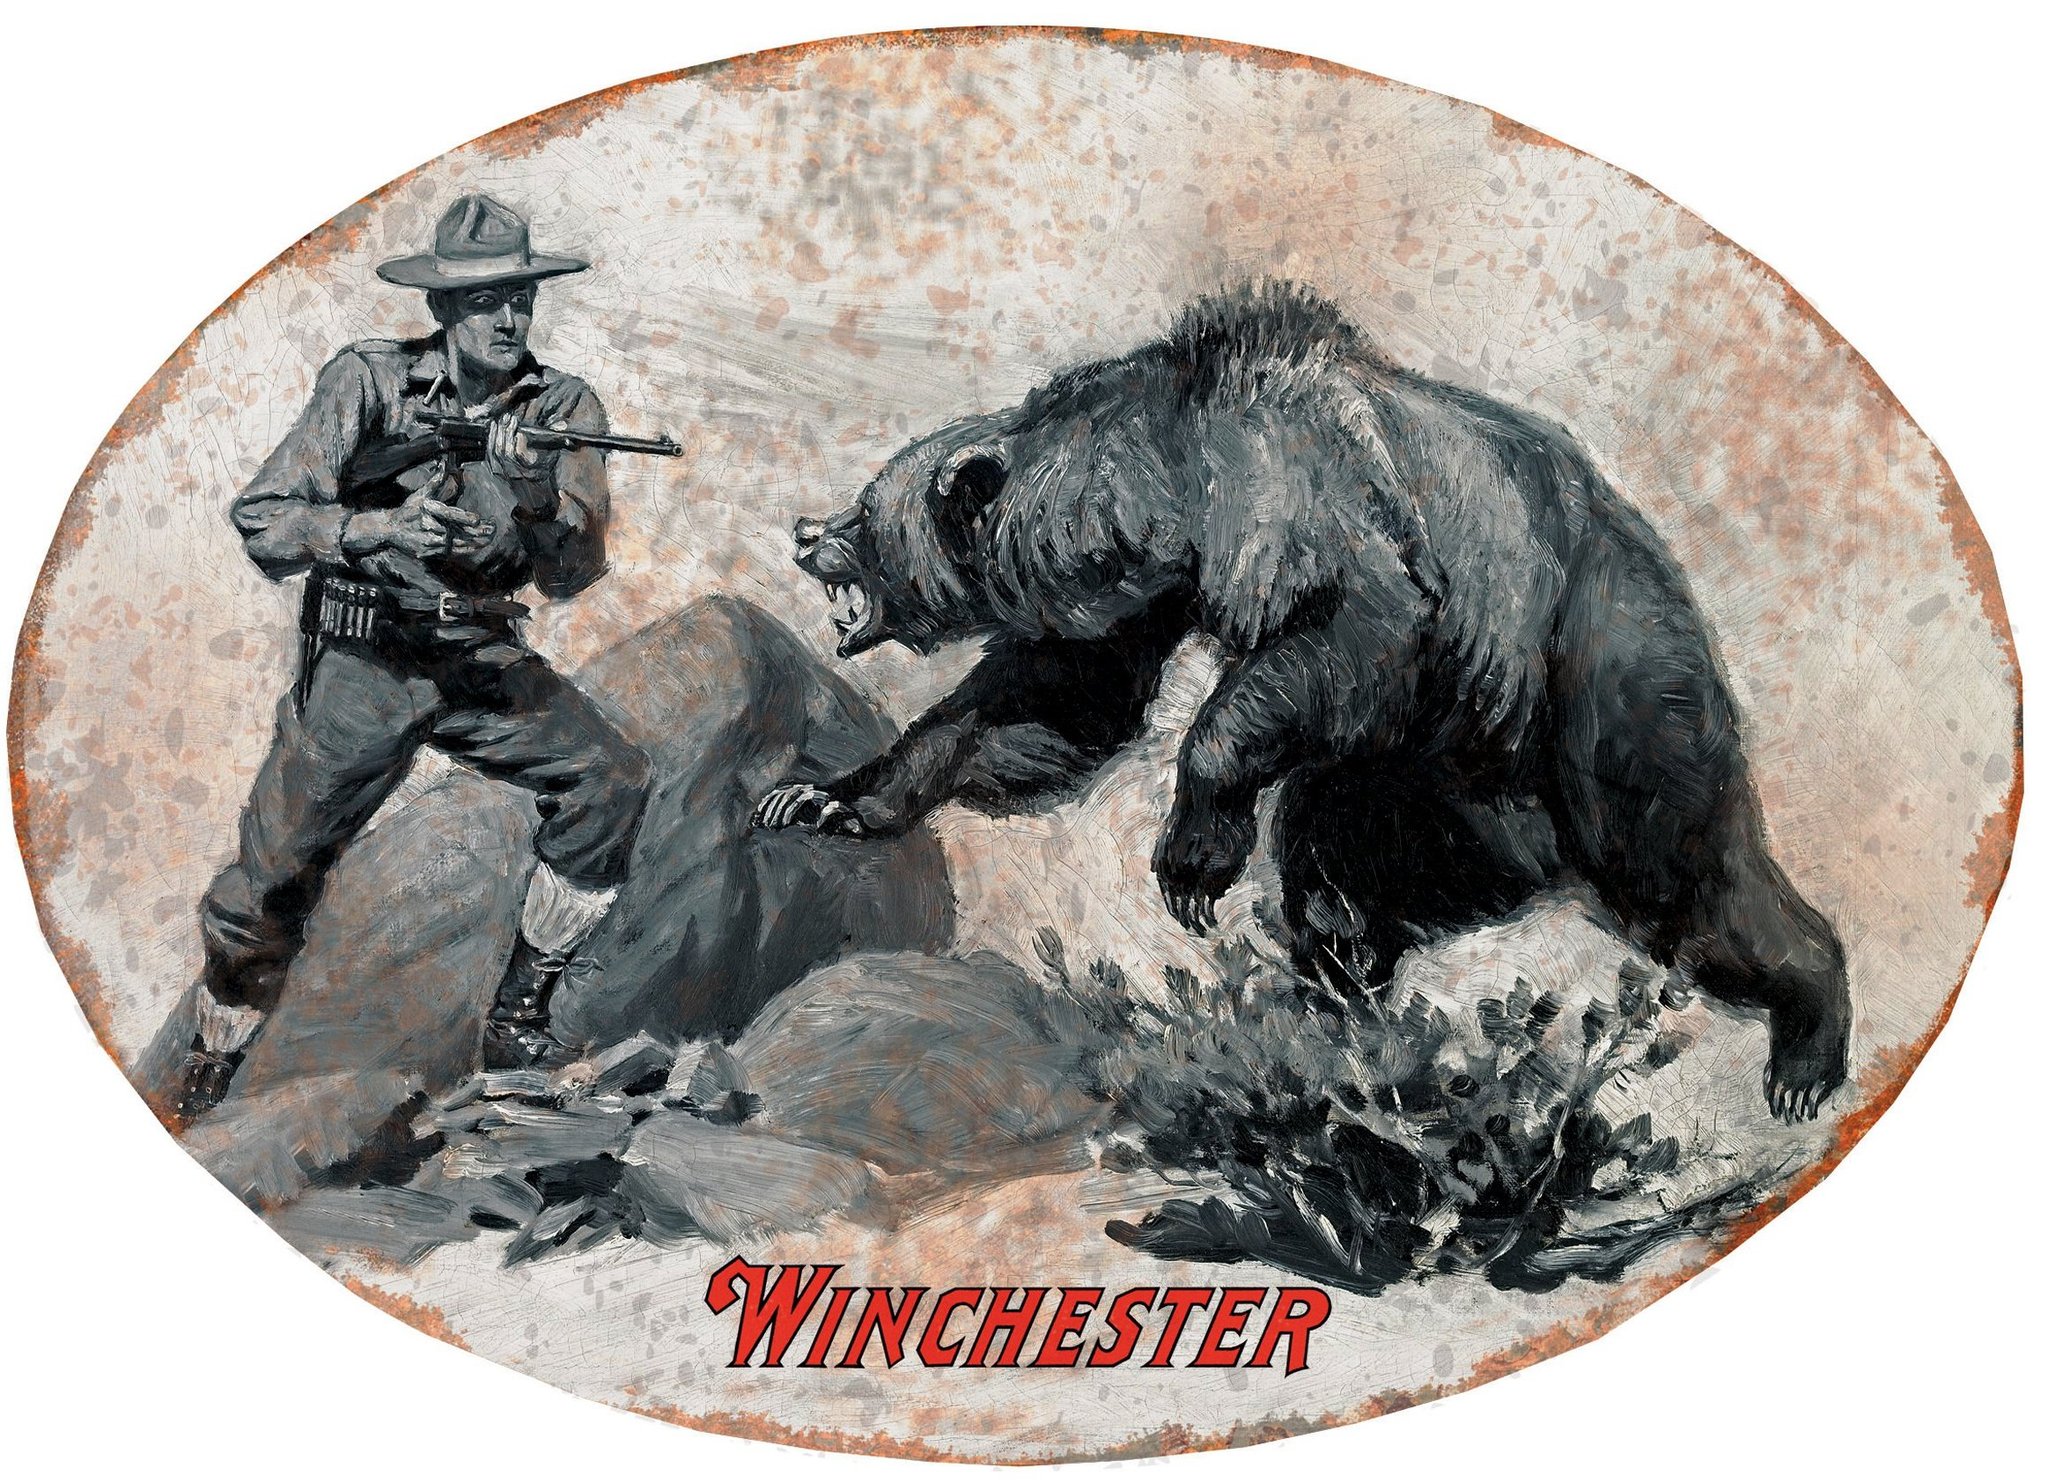 Winchester Man confronts bear: Antique style metal sign